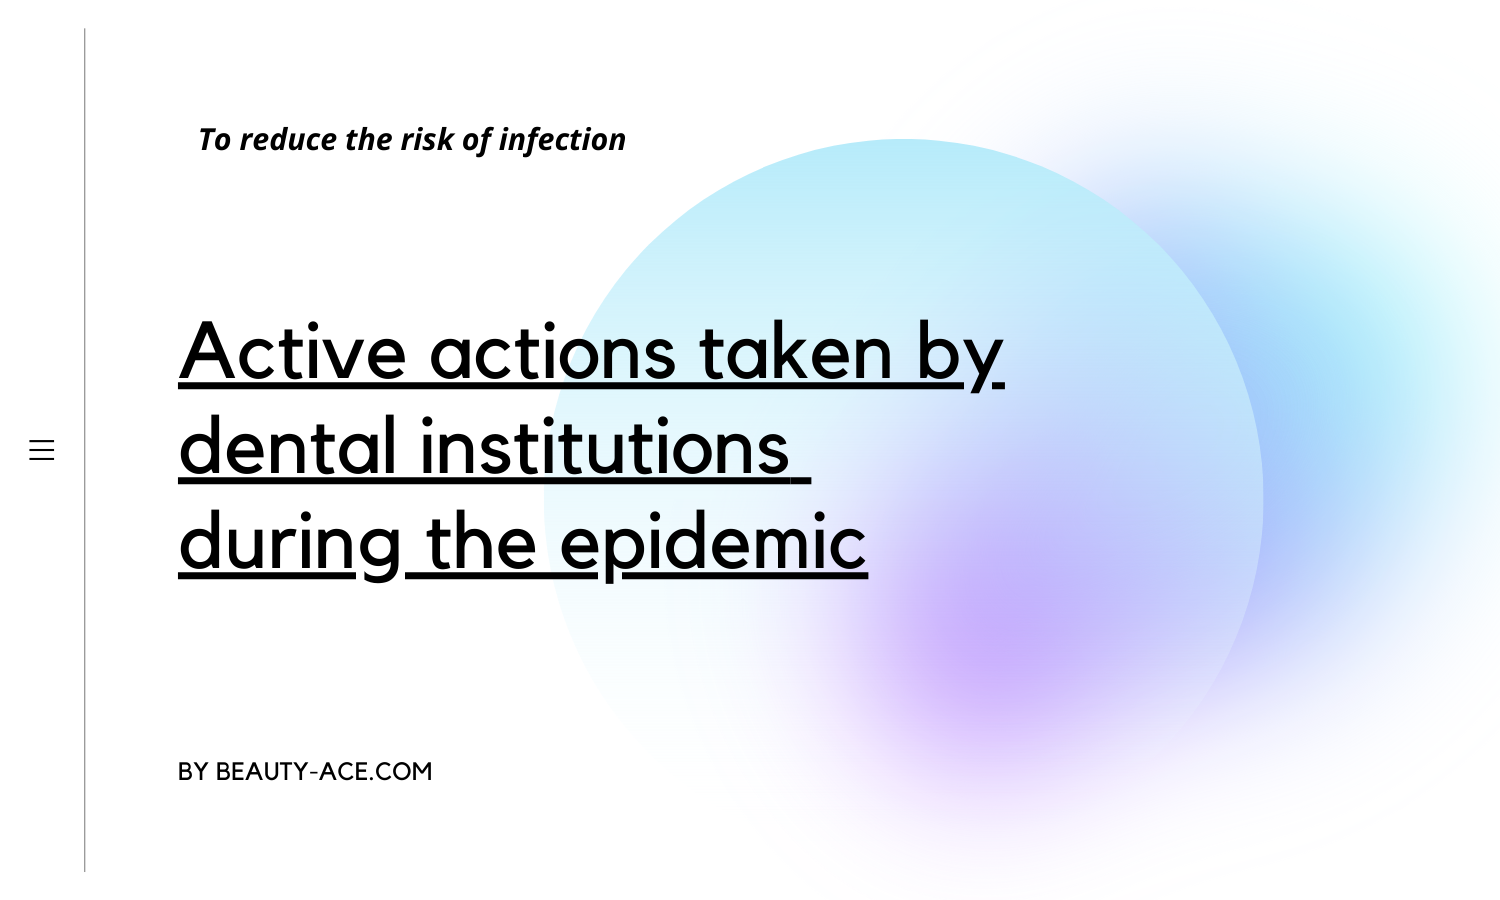 Active actions taken by dental institutions to reduce the risk of infection during the epidemic